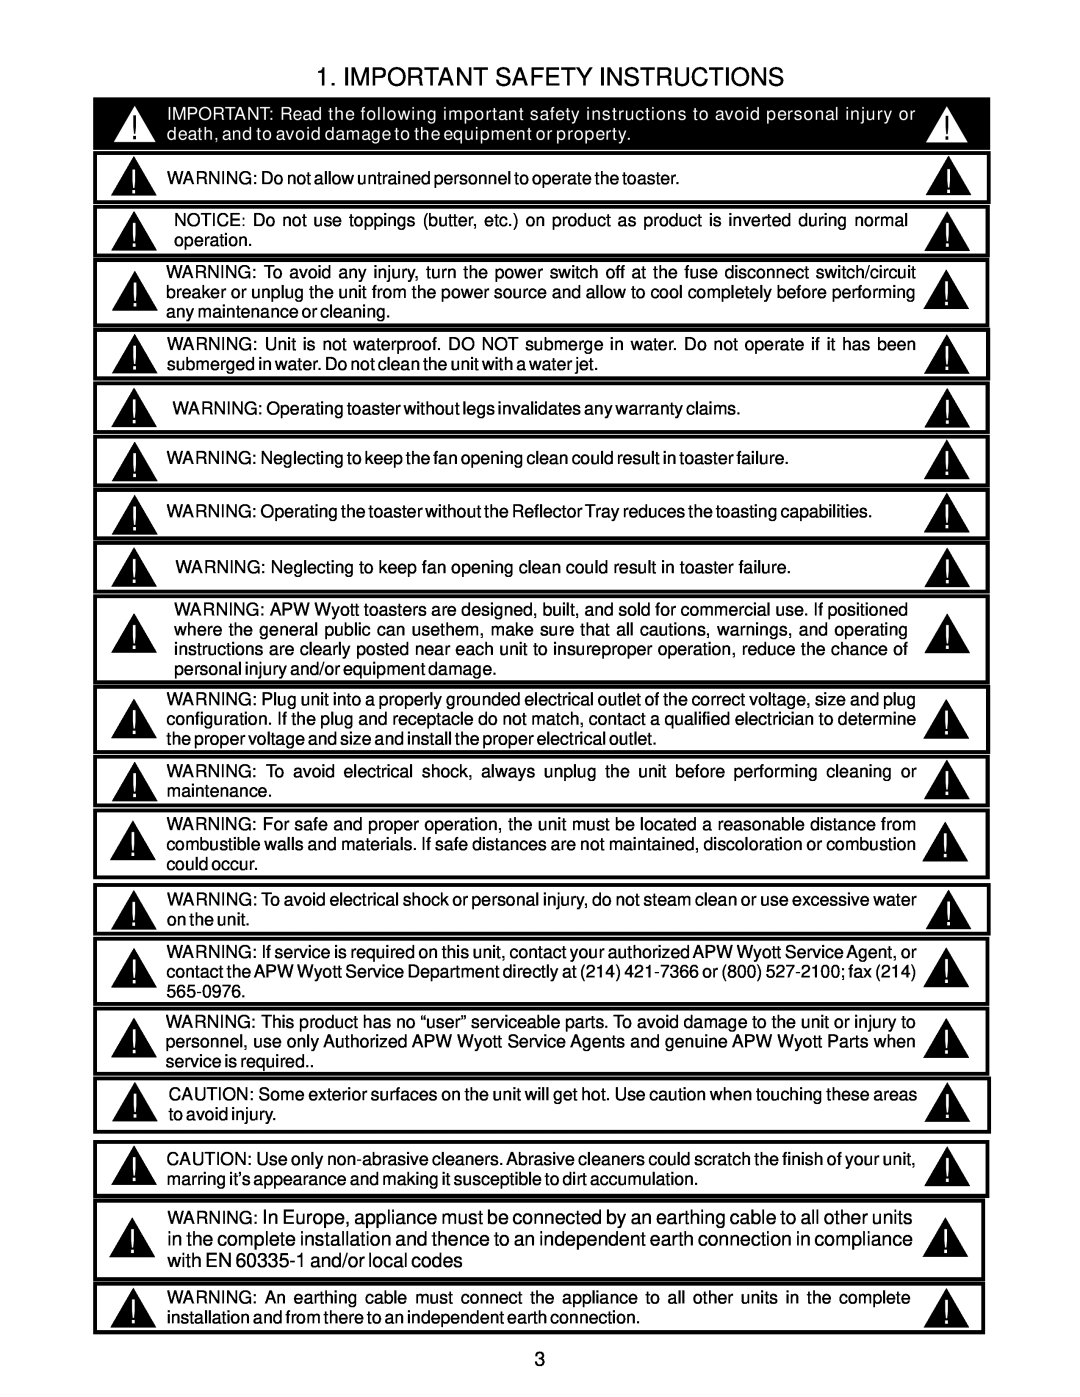 APW Wyott FT 800H operating instructions Important Safety Instructions, with EN 60335-1and/or local codes 